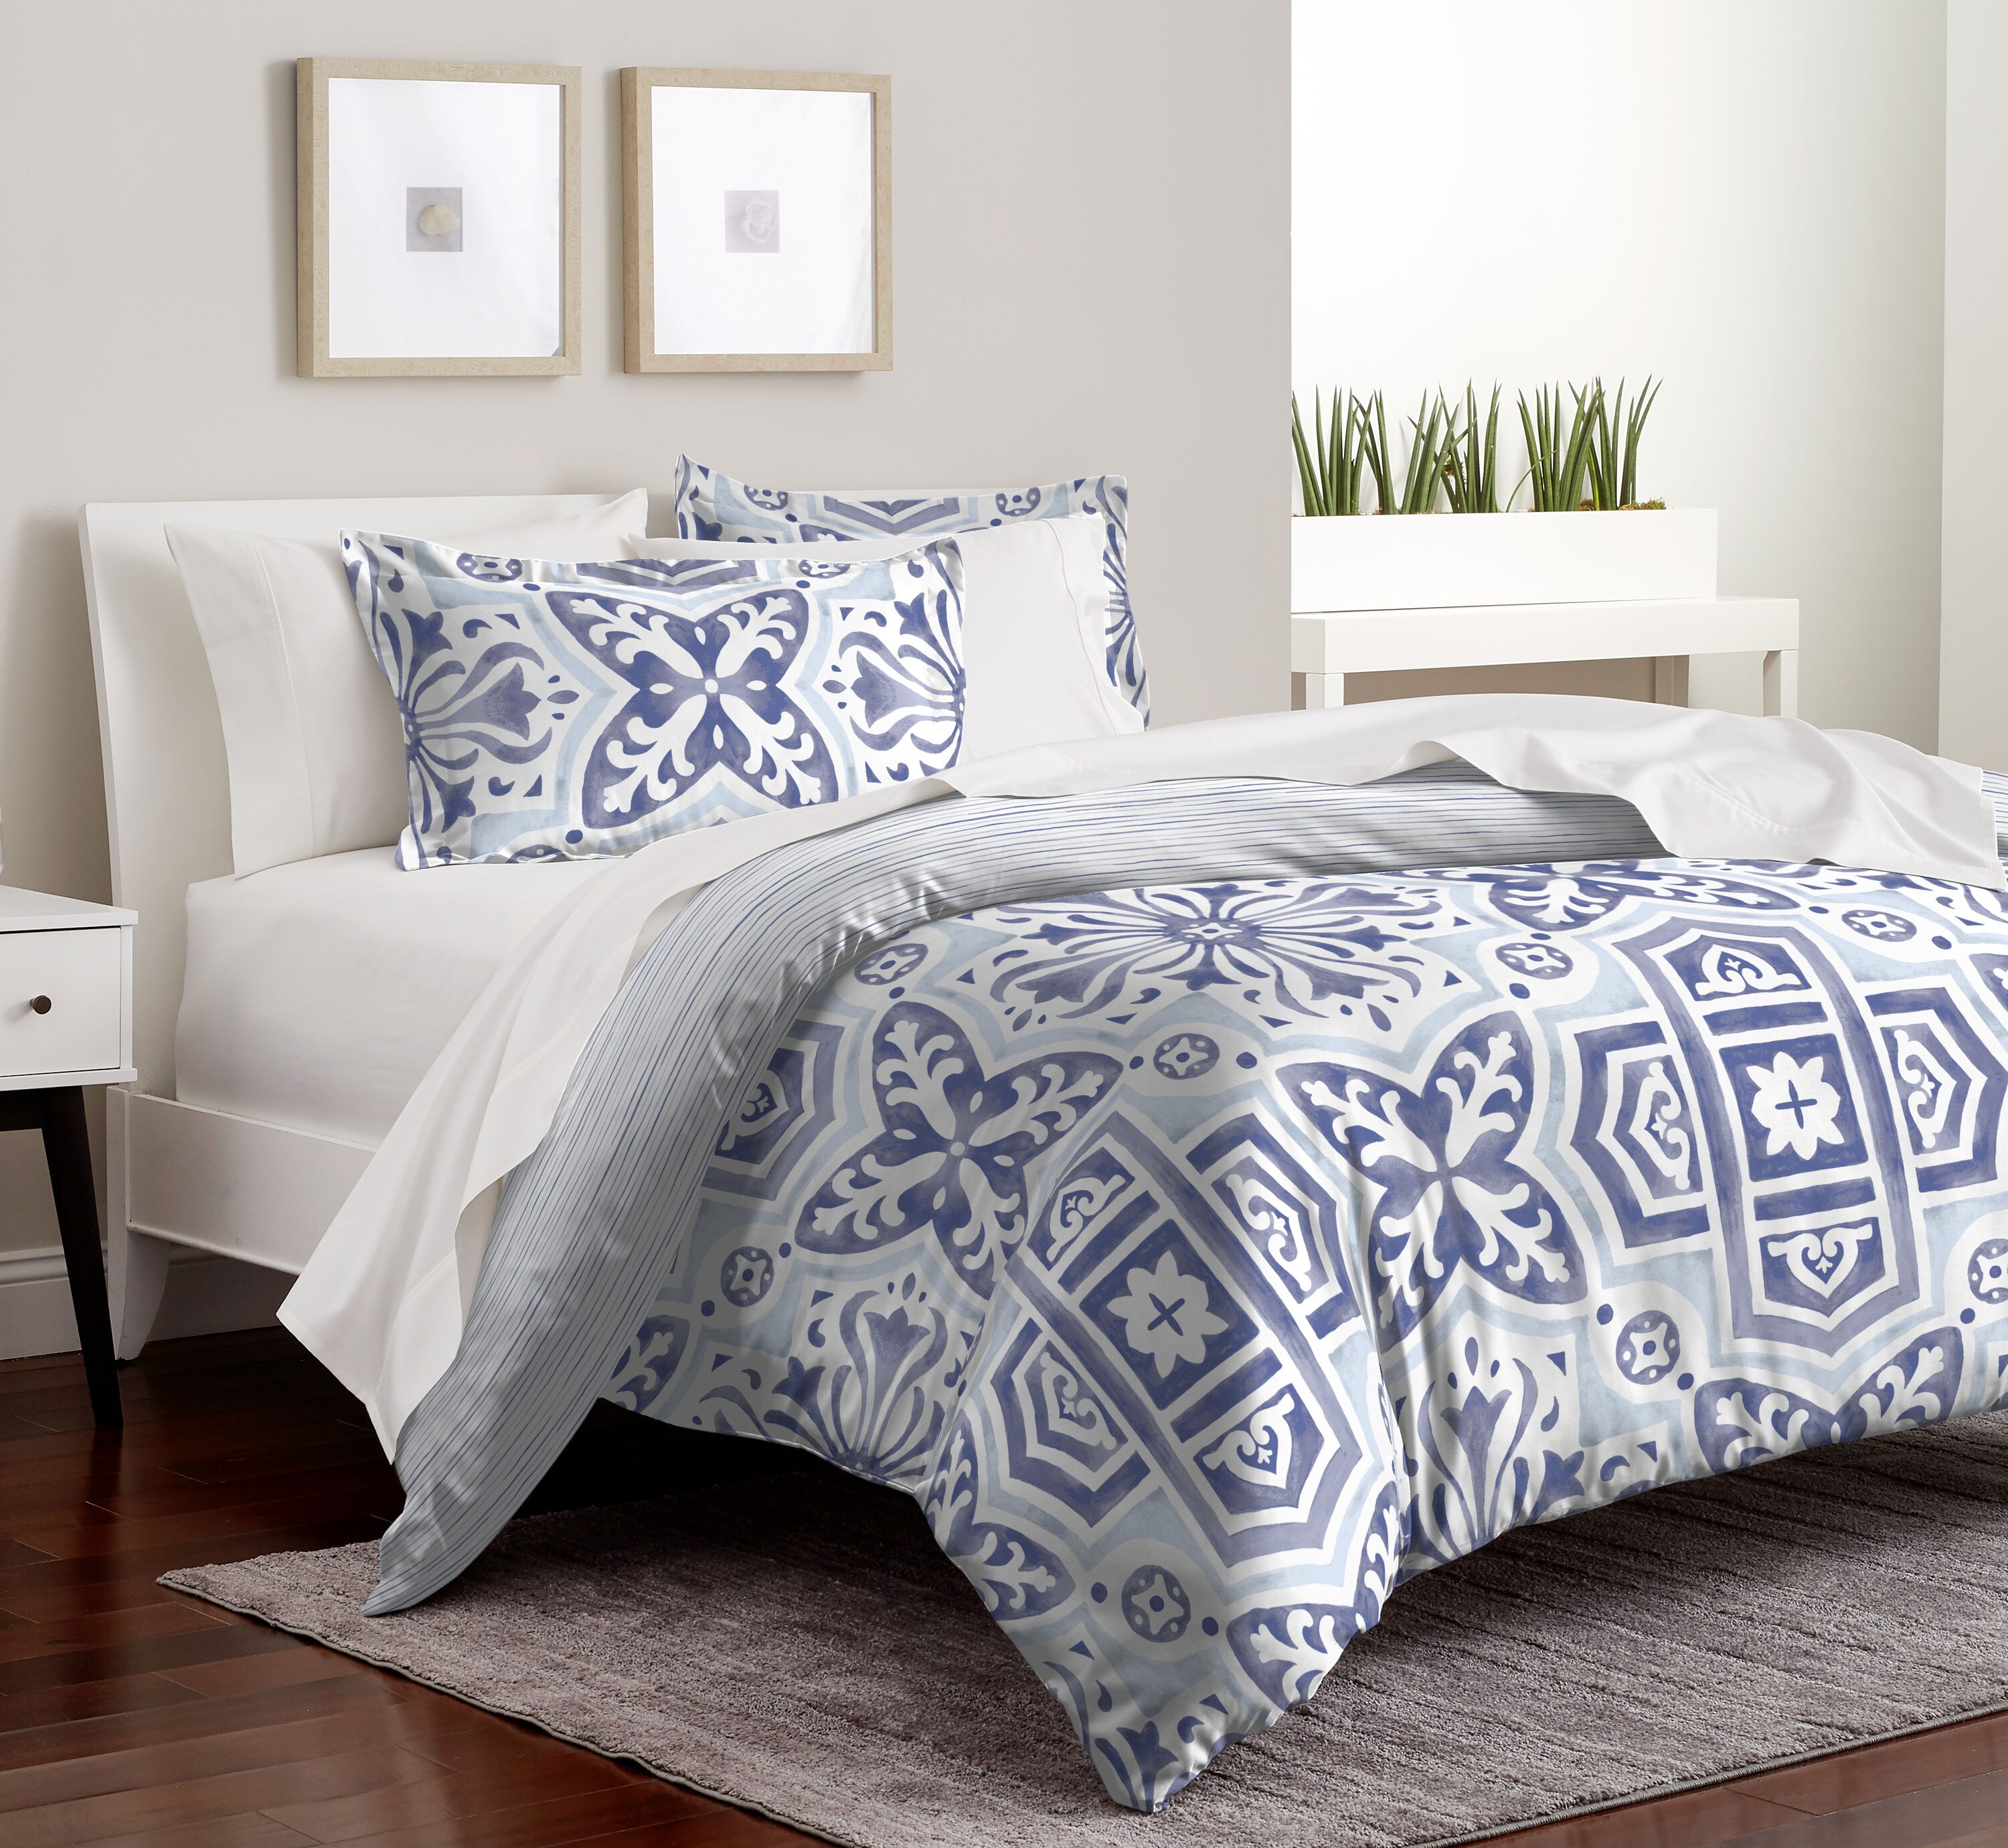 allen + roth Comforters & Bedspreads at